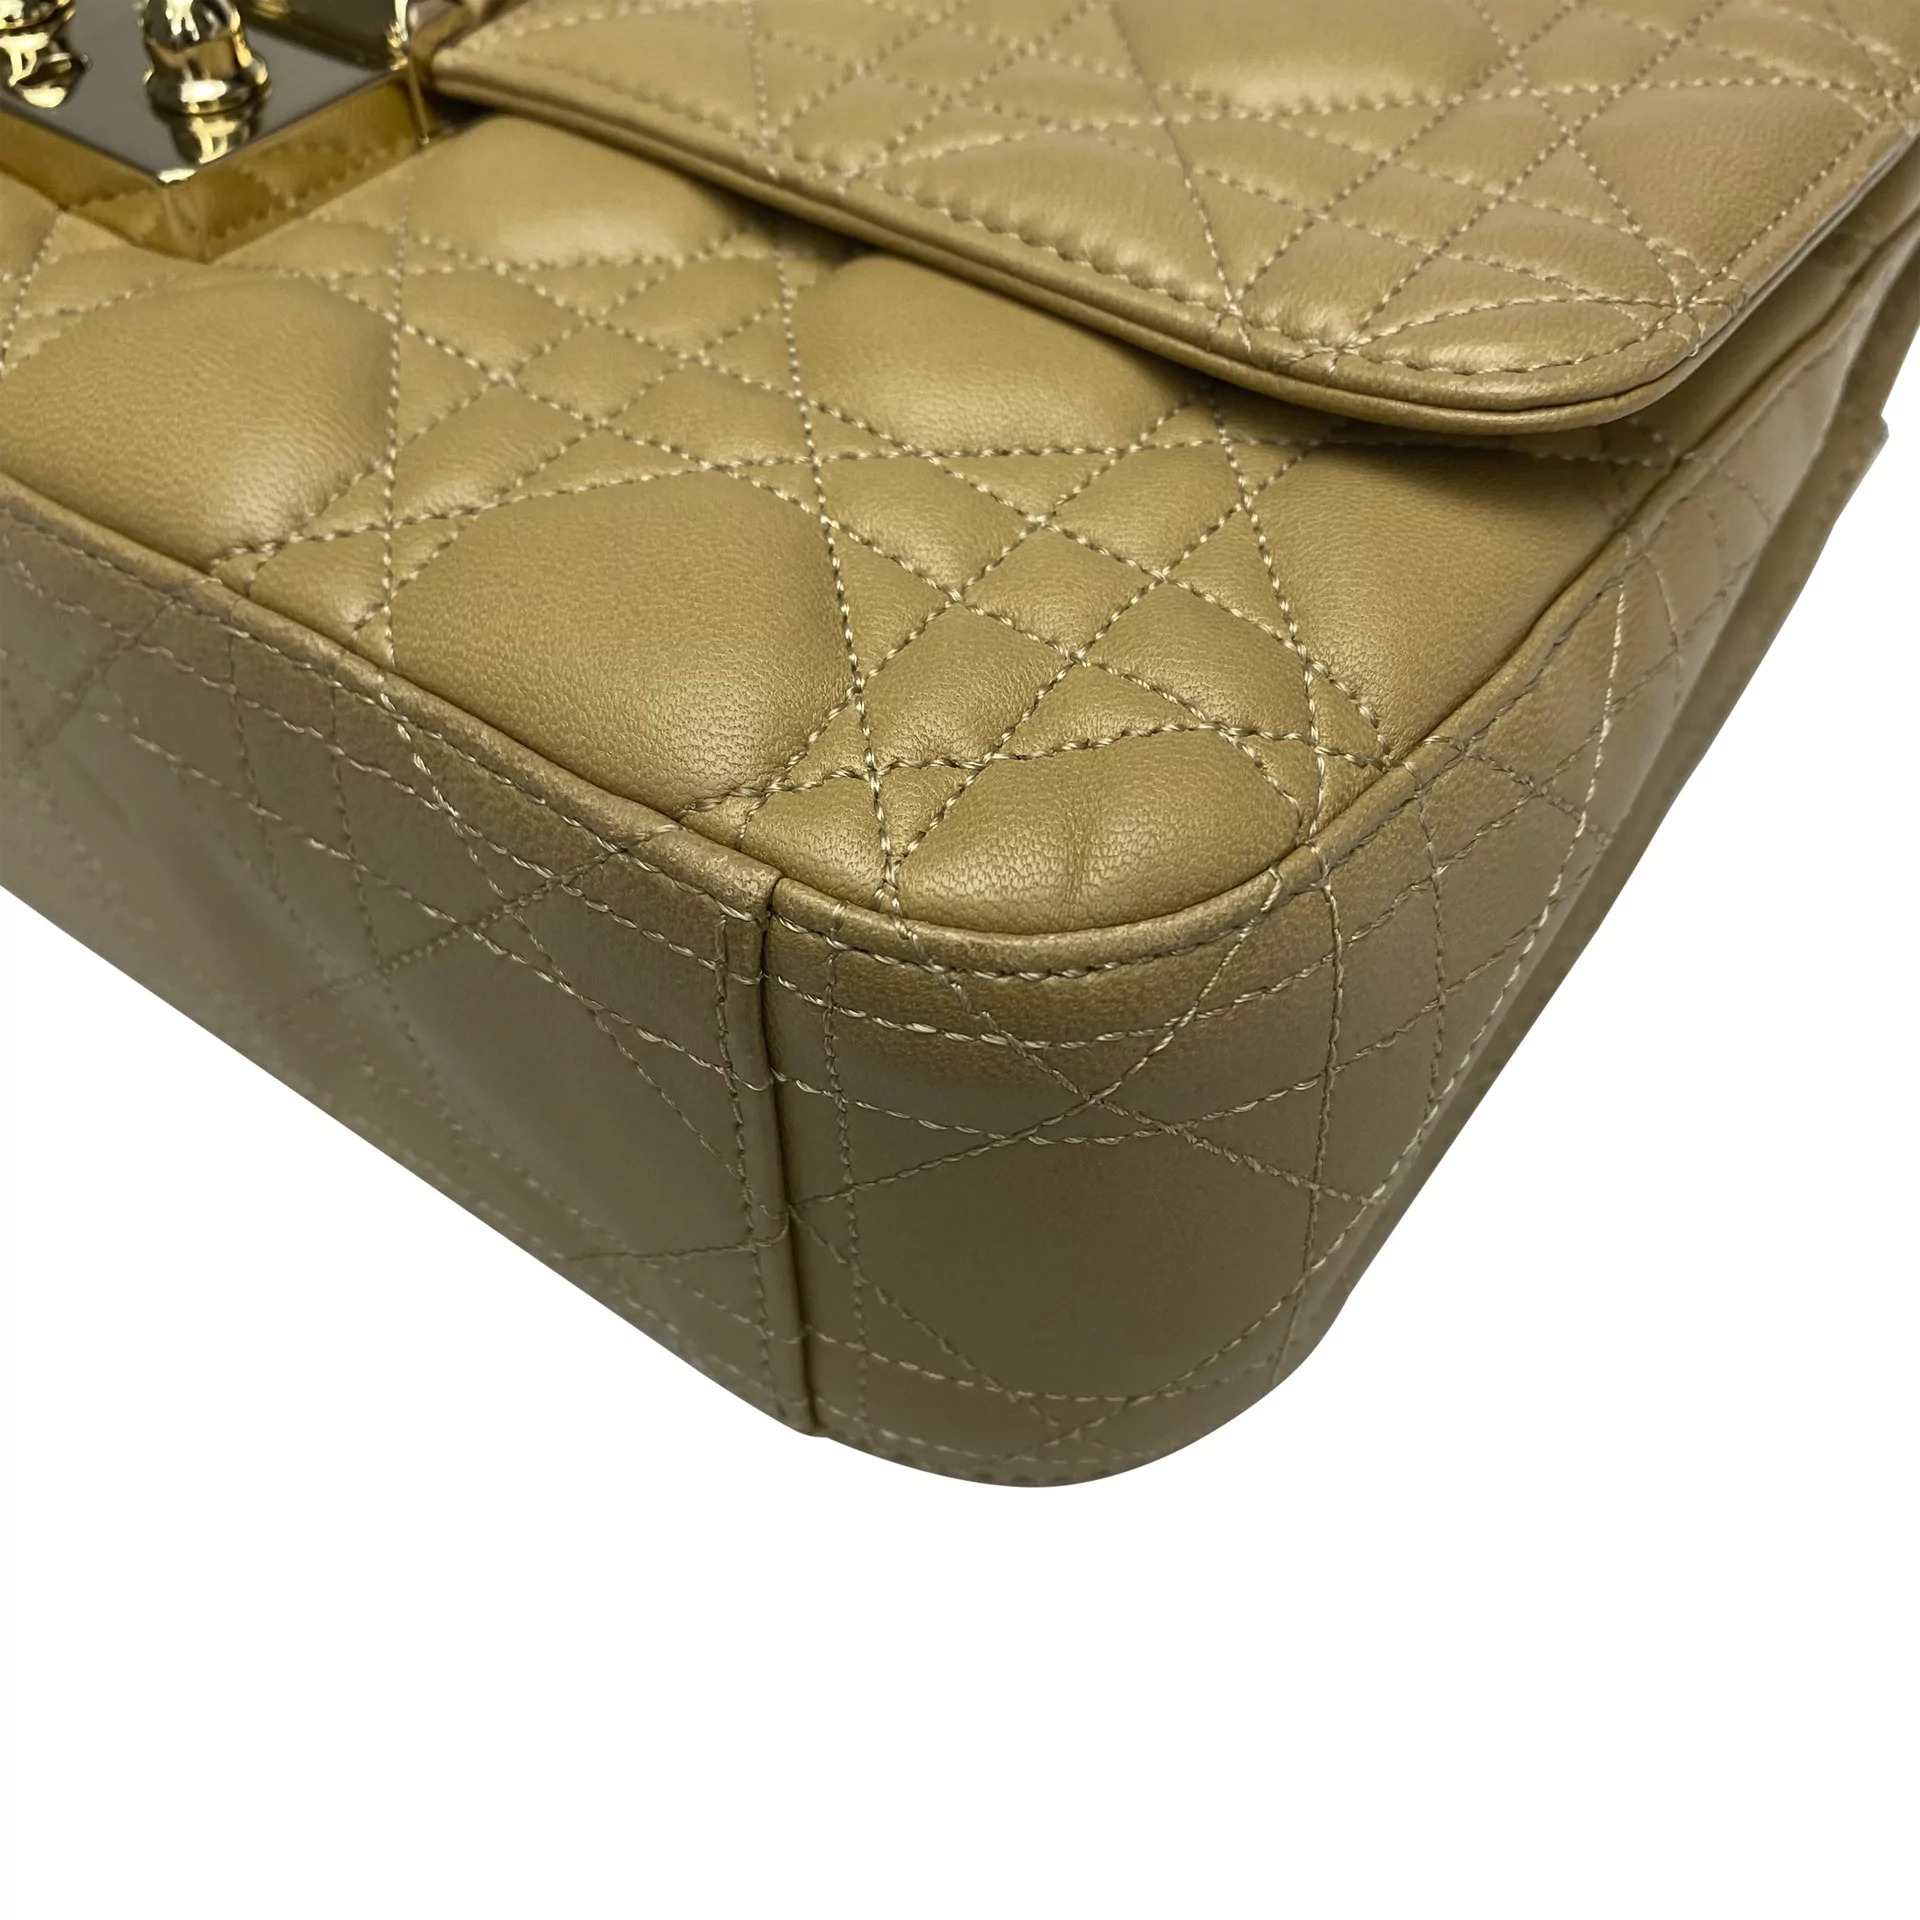 Bolsa Christian Dior Miss Promenade Cannage Quilted